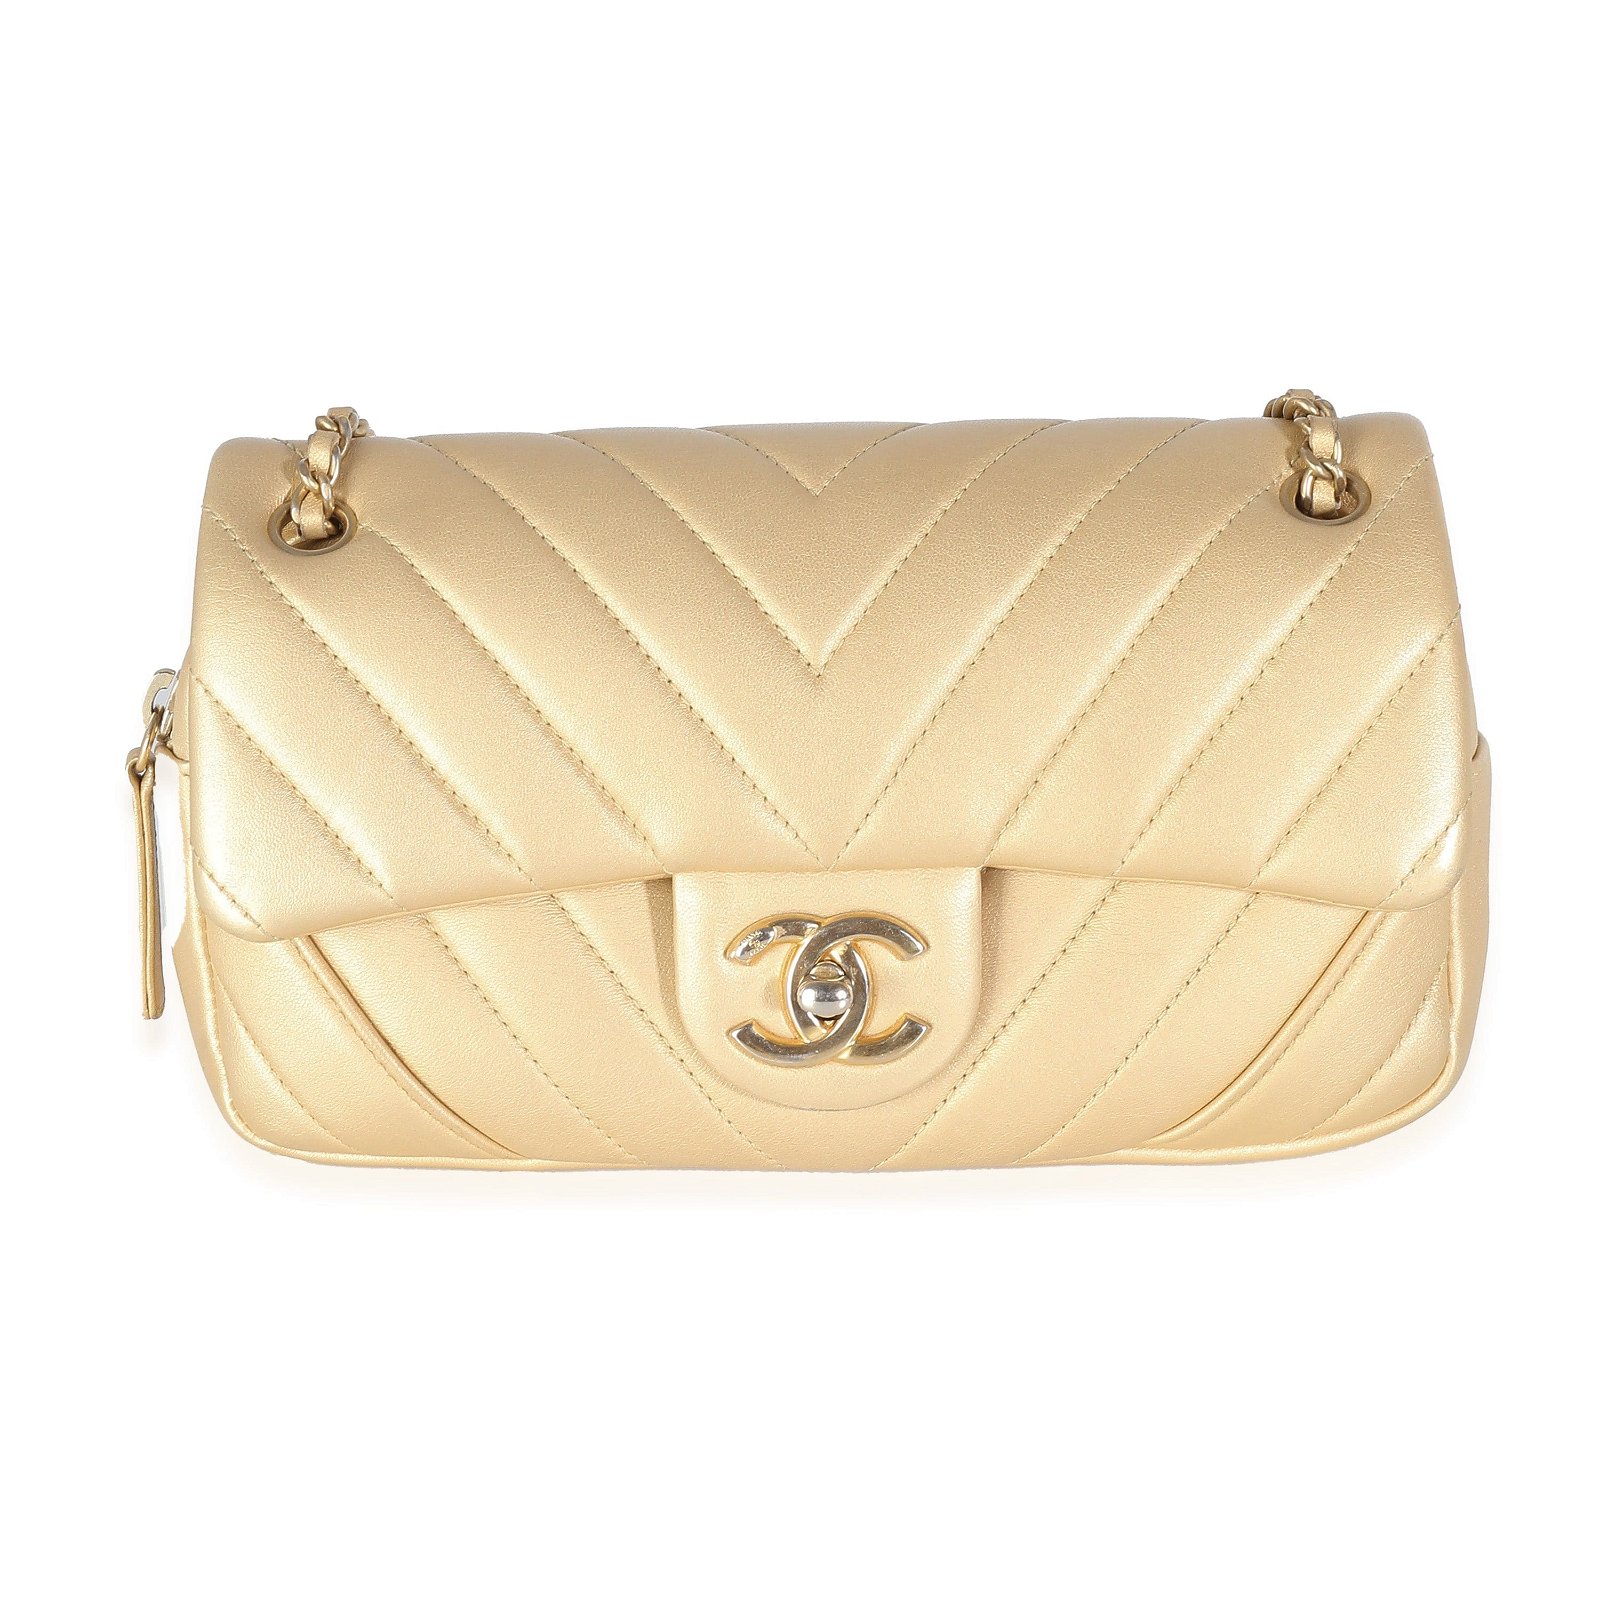 Image of Chanel Gold Chevron Flap Bag with Gold Hardware ULC1058